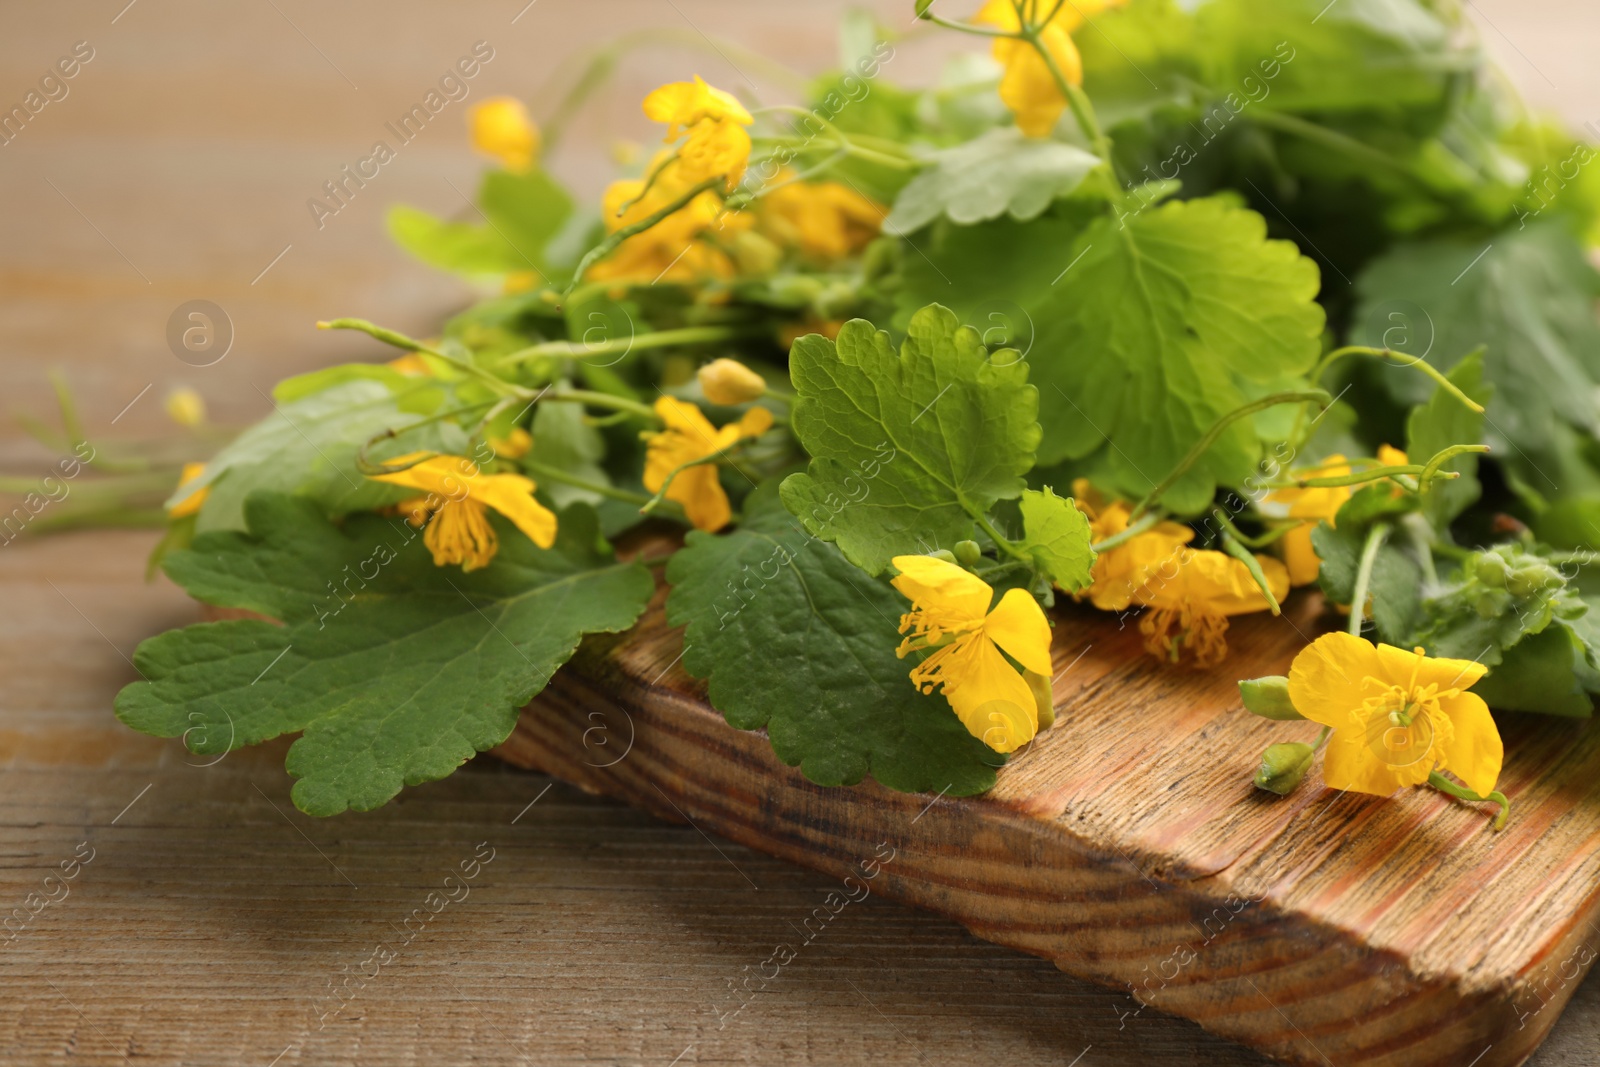 Photo of Celandine with beautiful yellow flowers on wooden table, closeup